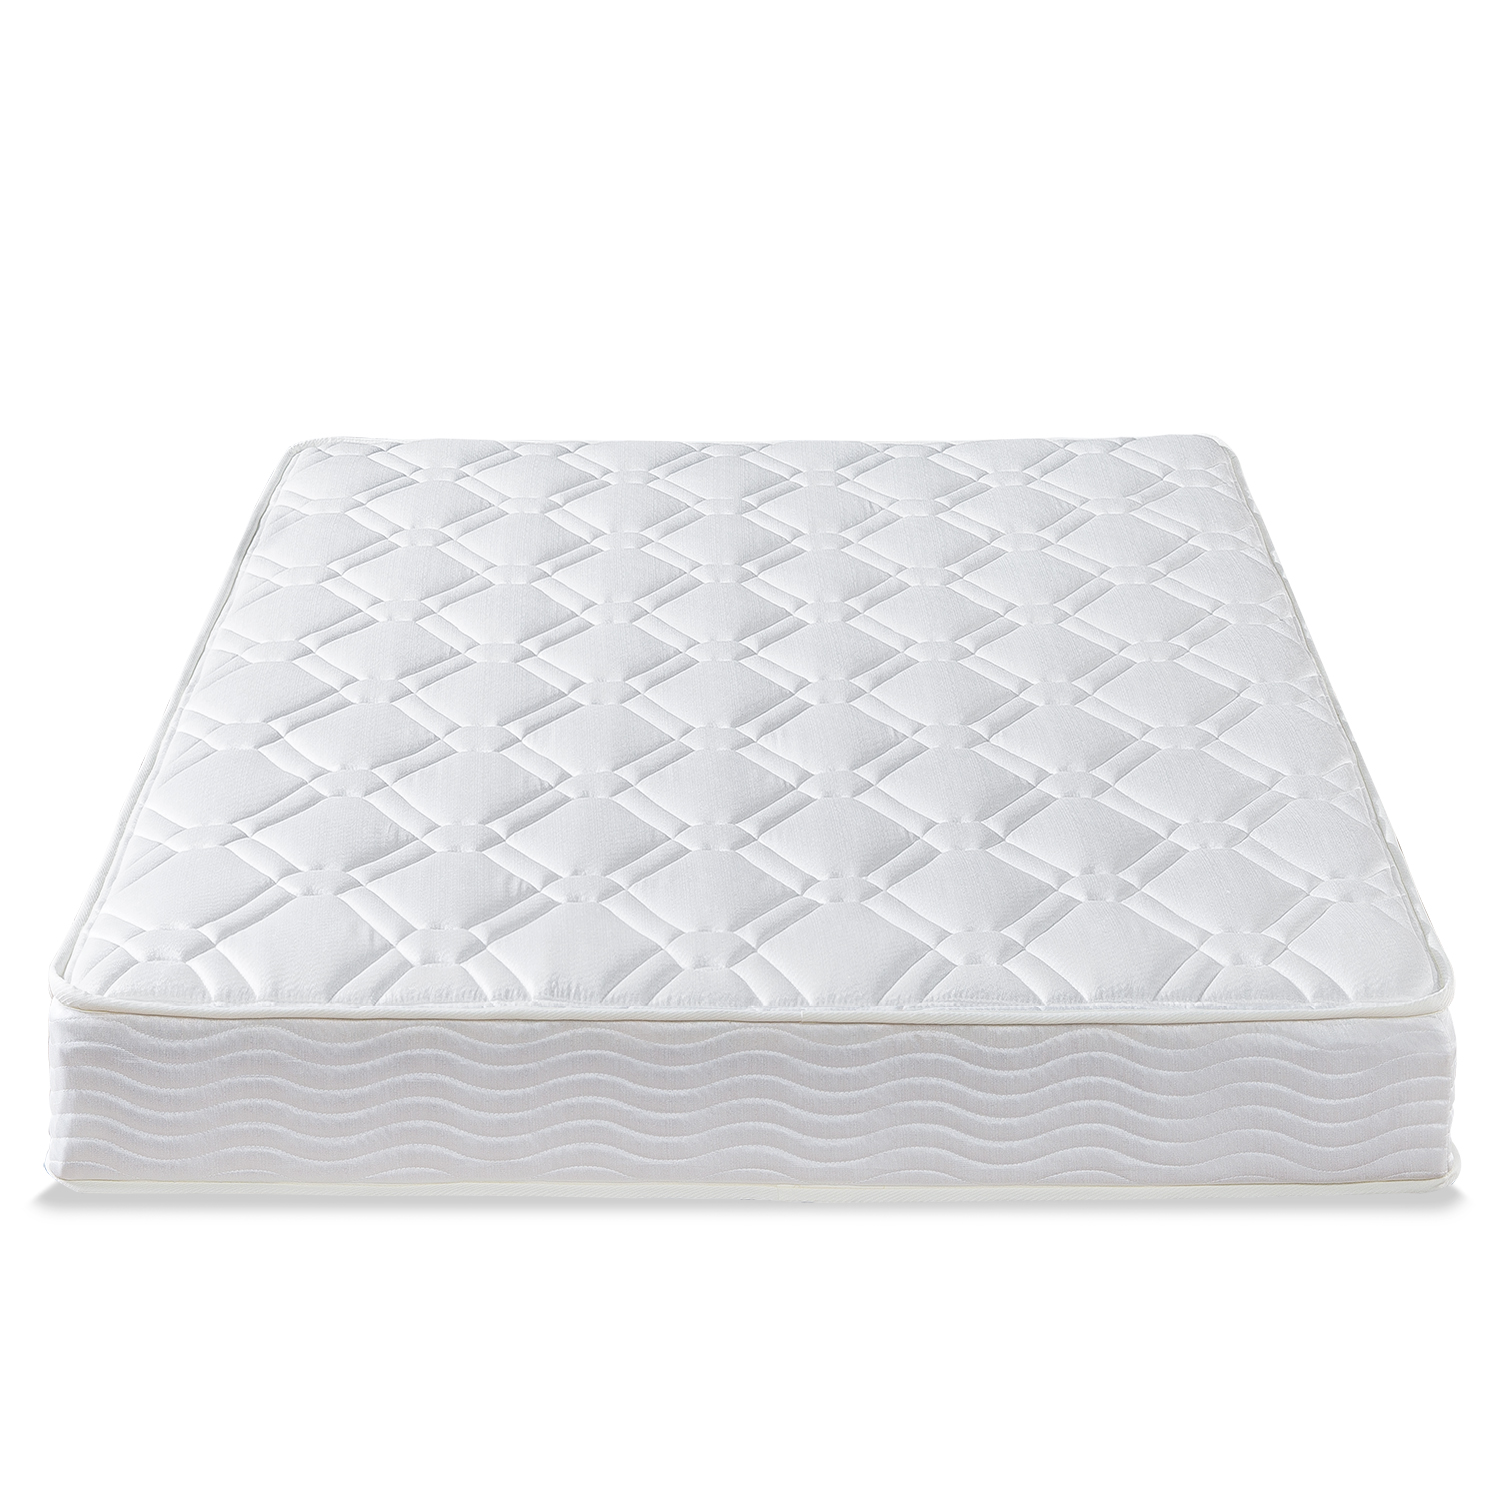 Slumber 1 by Zinus Support 8" Spring Mattress, Twin - image 7 of 10